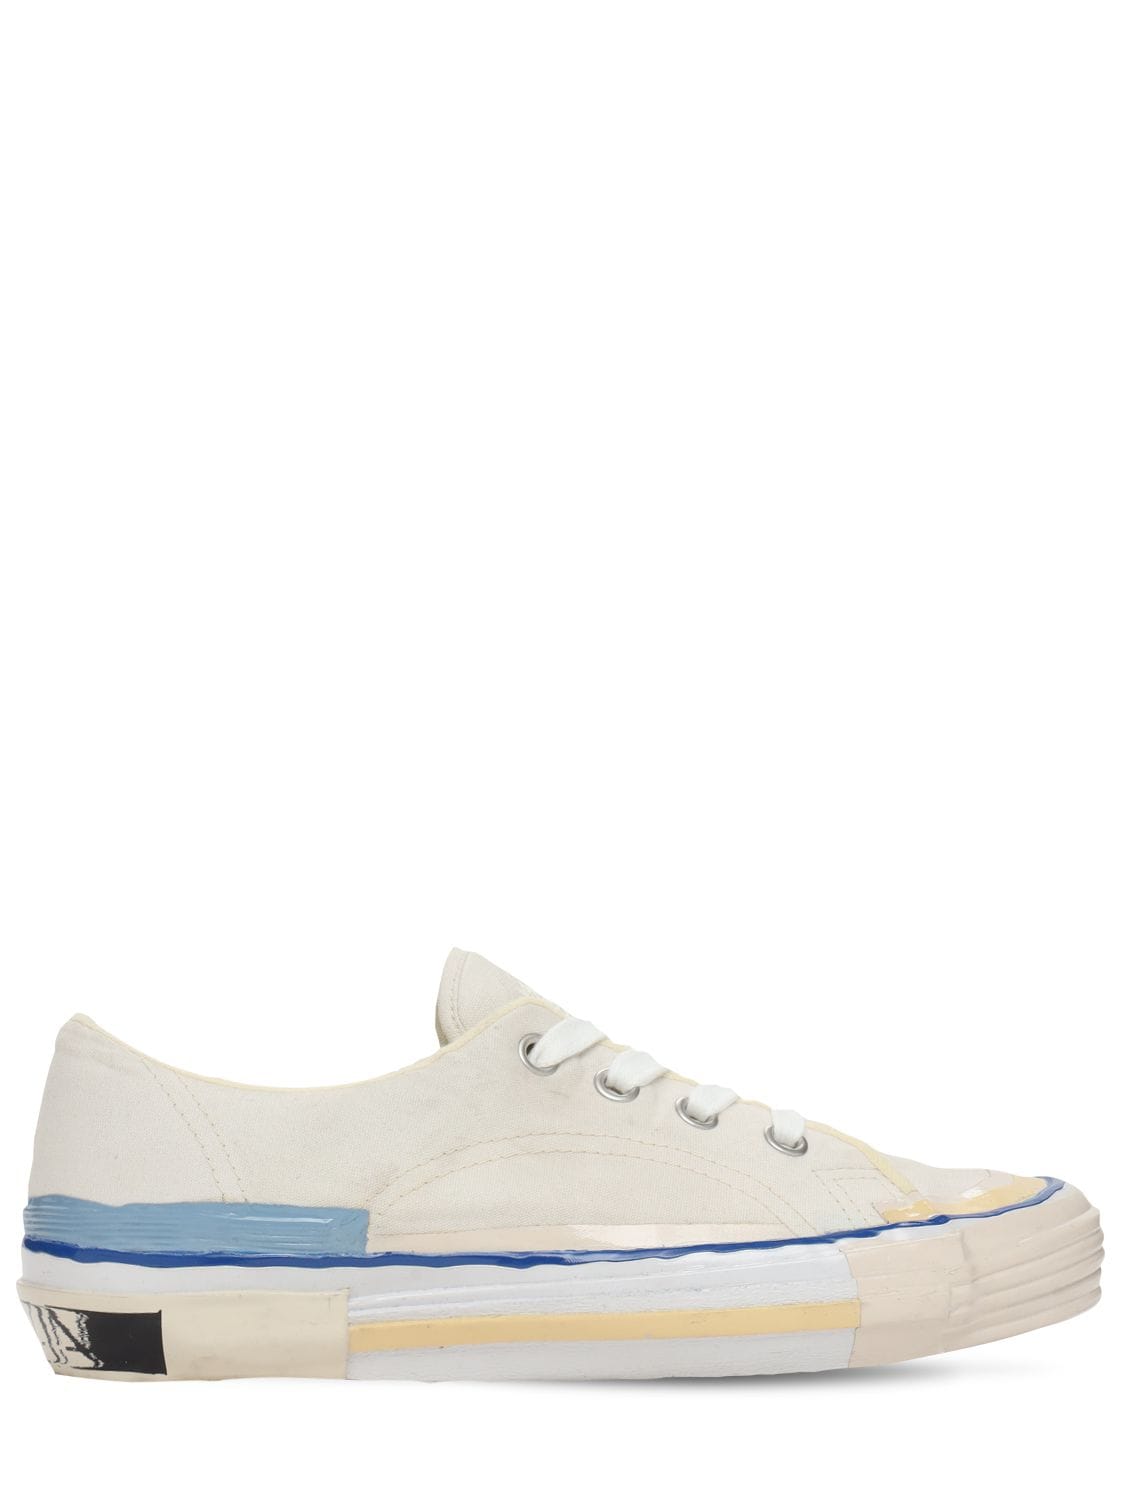 Lanvin MELTED LOW TOP VULCANIZED SNEAKERS